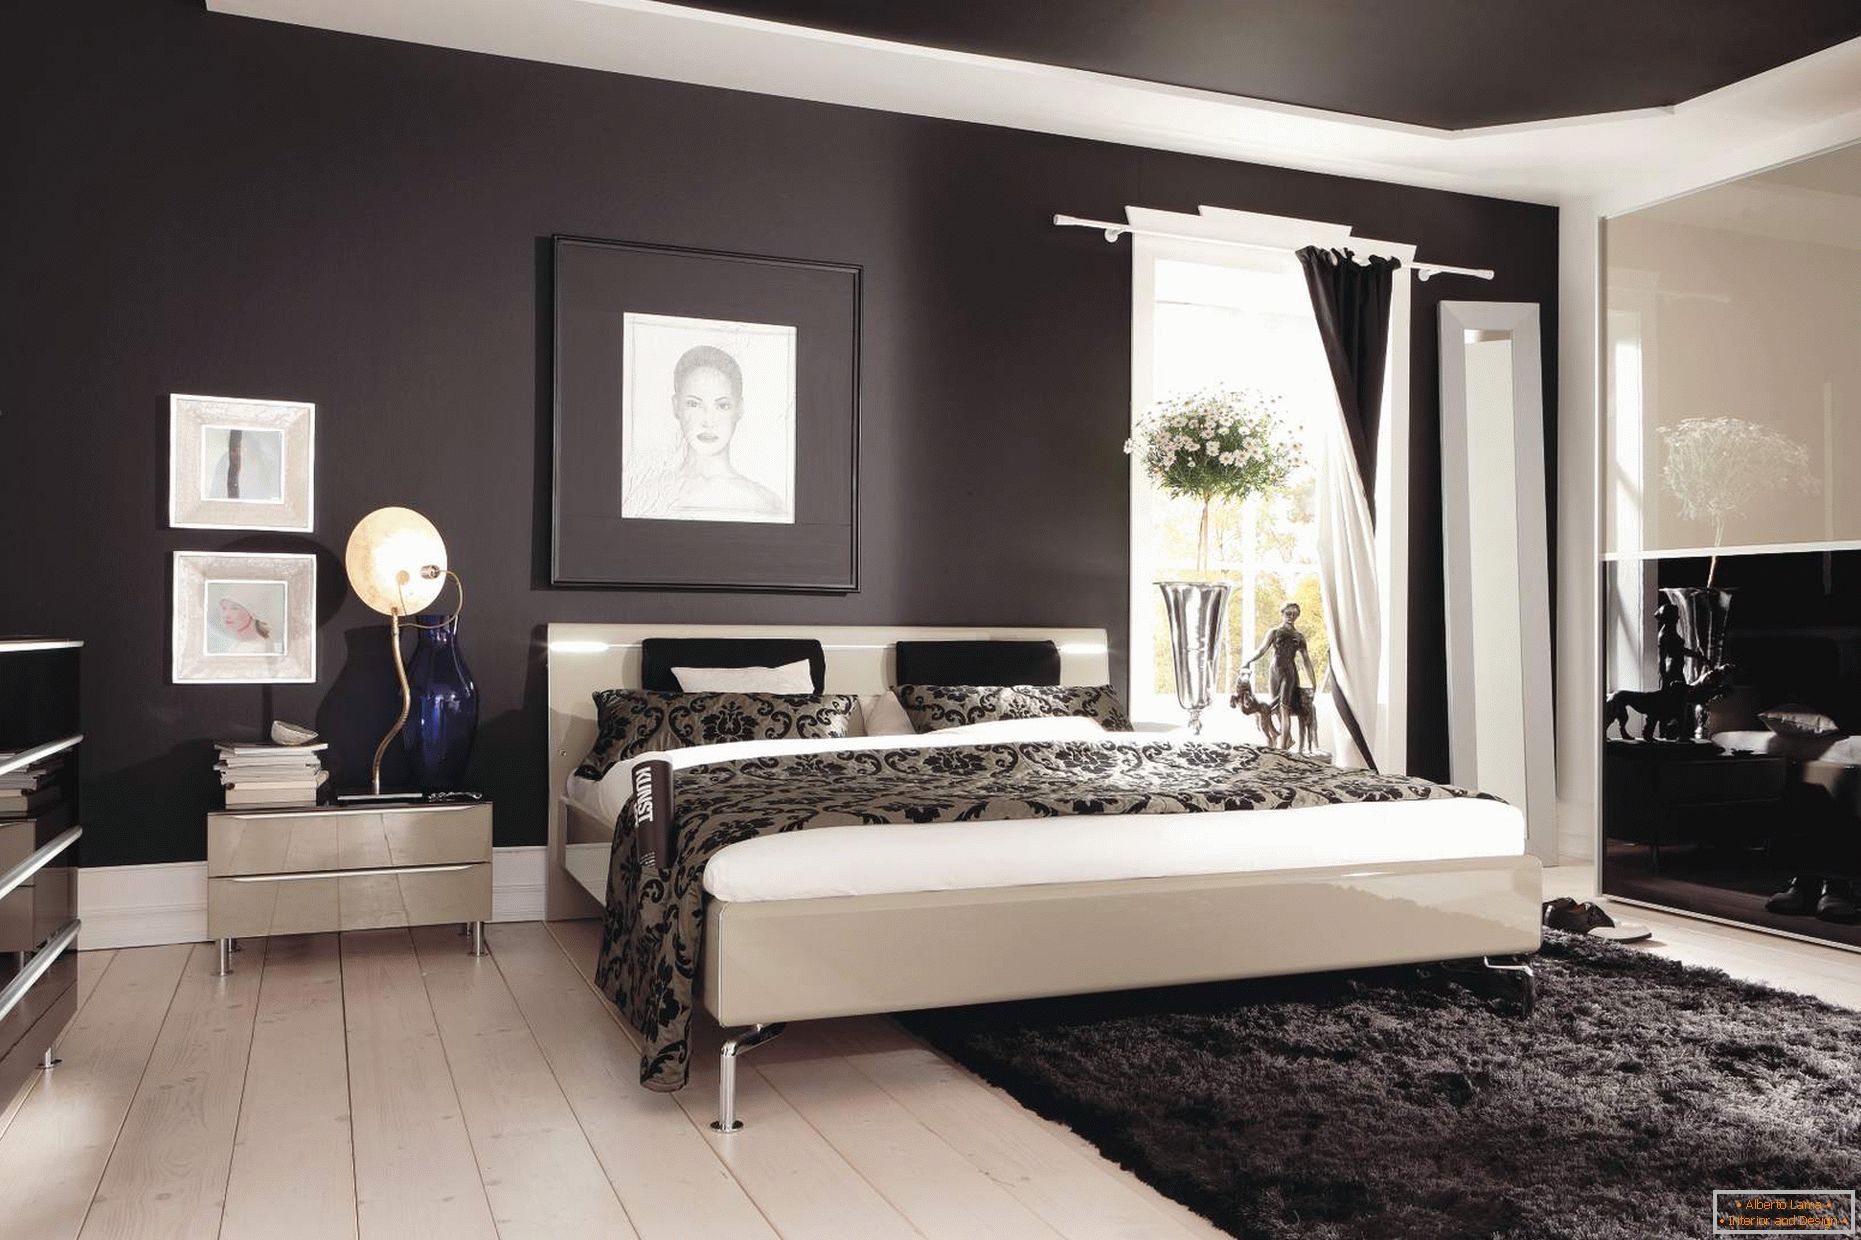 Black ceiling and walls in the bedroom